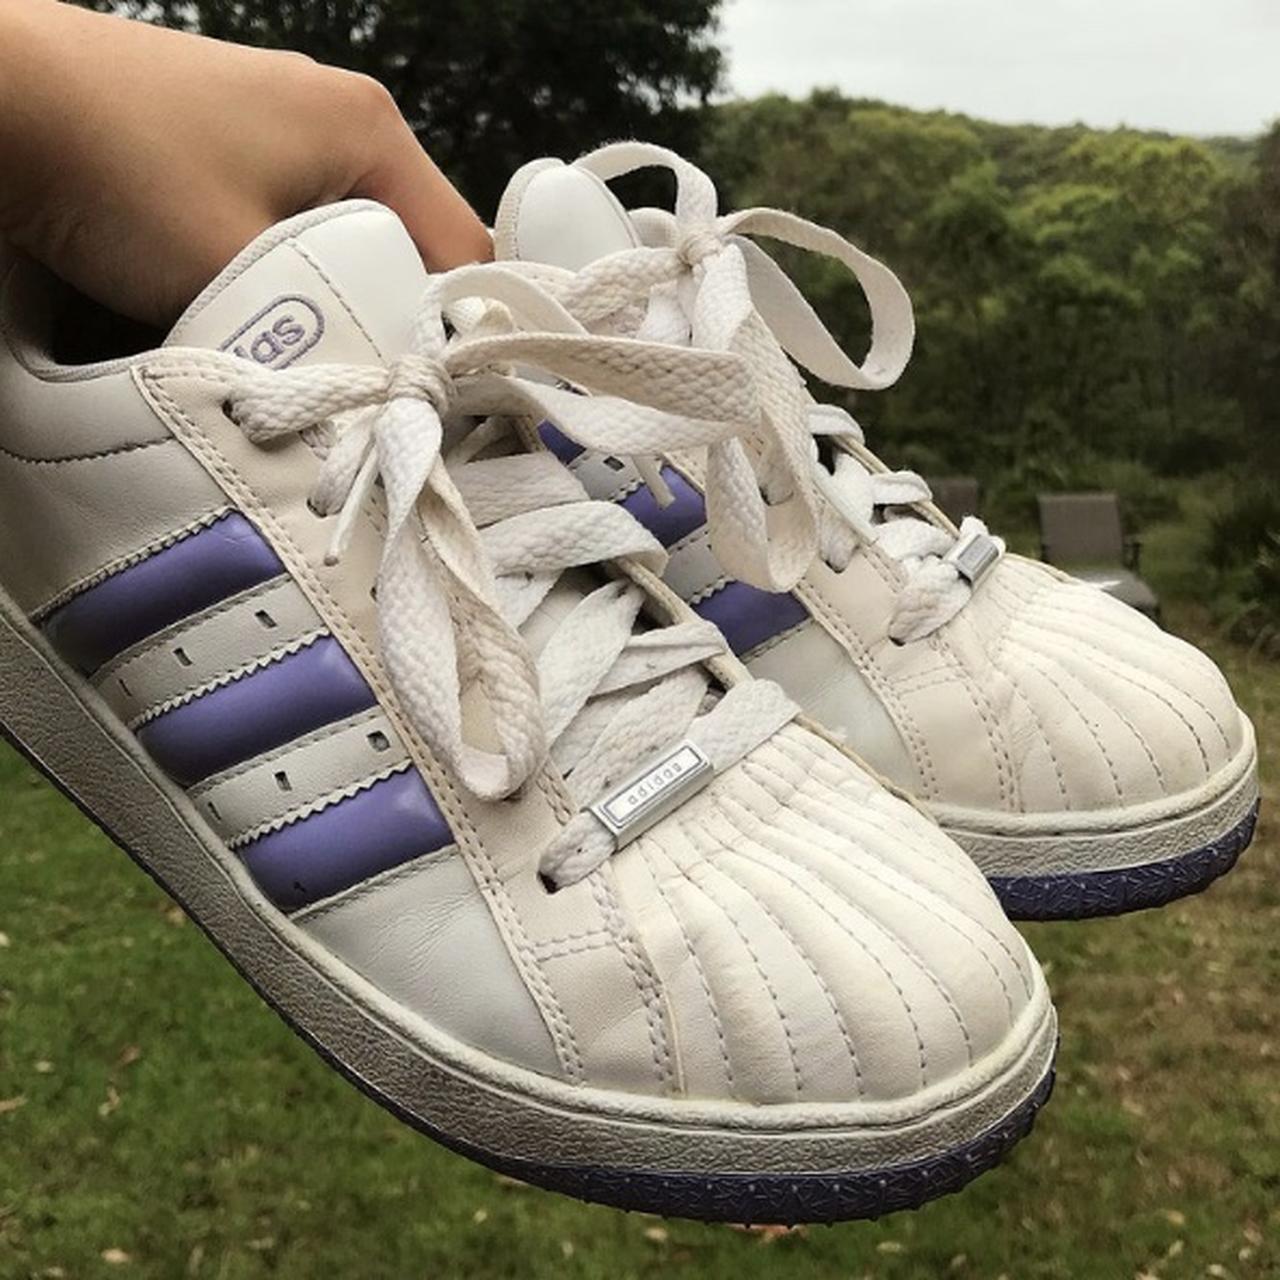 Old School shell toe Superstar Adidas tennis shoes.